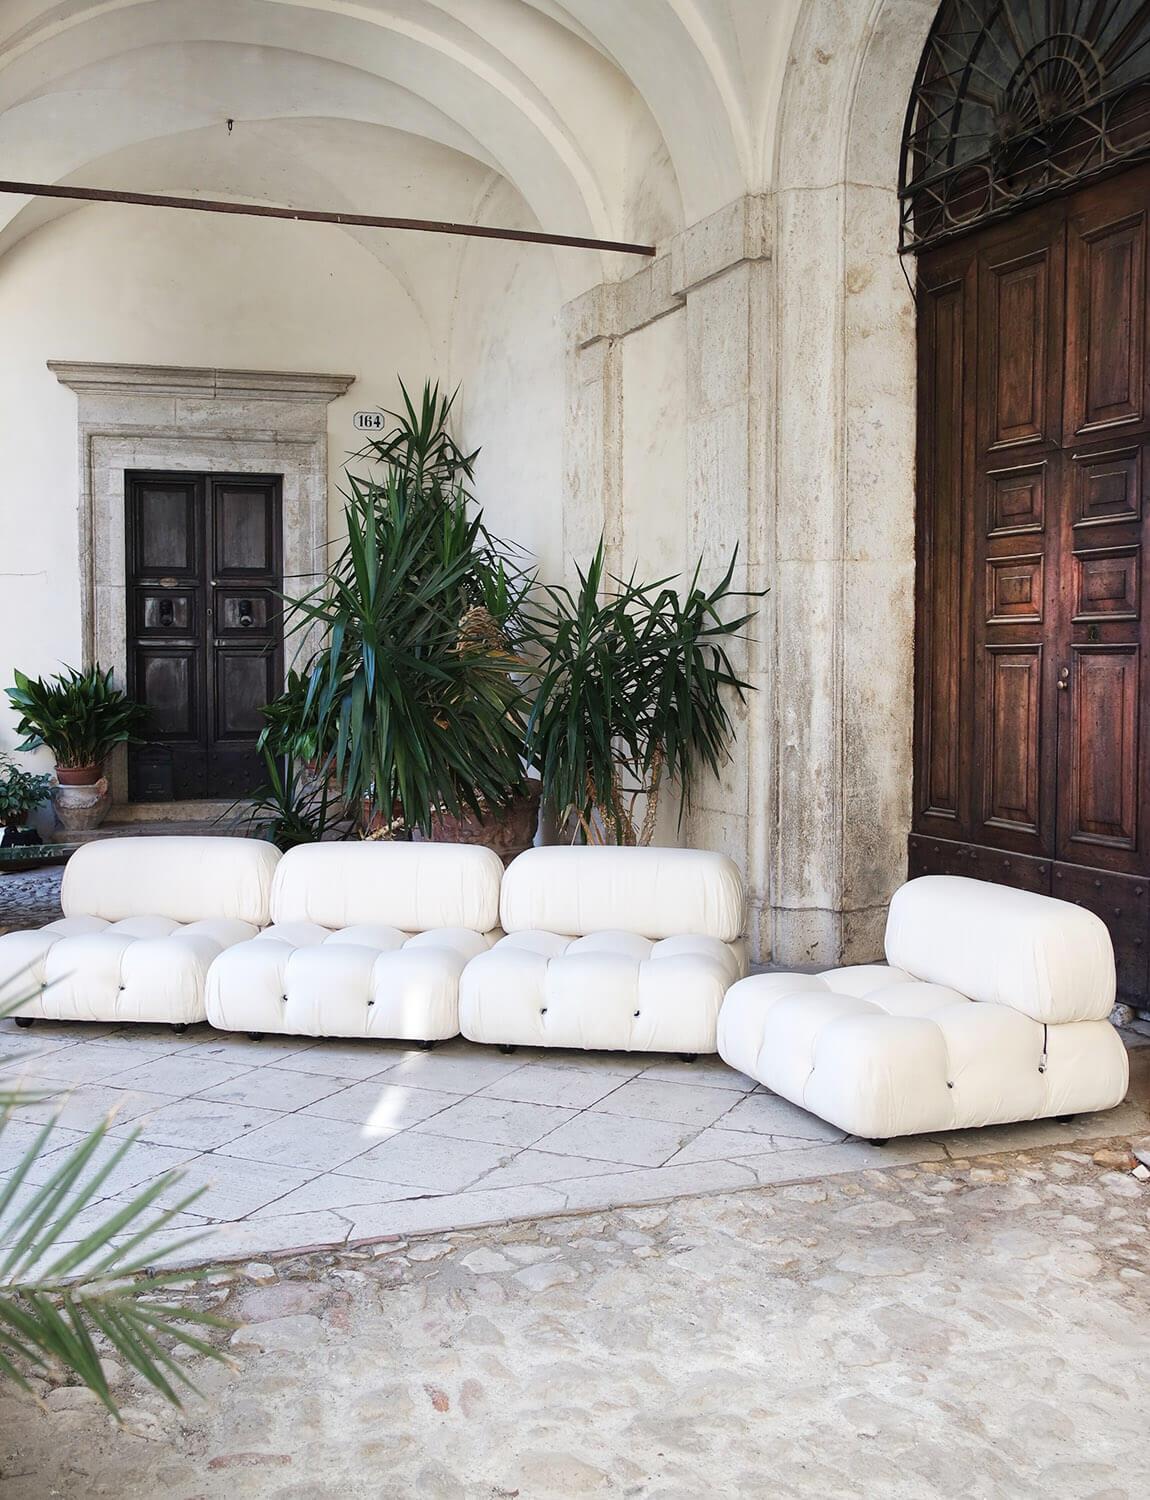 A beautiful example of an original 1970s Camaleonda sofa designed by Mario Bellini for B&B Italia in the 1970s. This iconic design piece is covered in its original thick cream cotton canvas. It has been in a private home in Forte dei Marmi for over